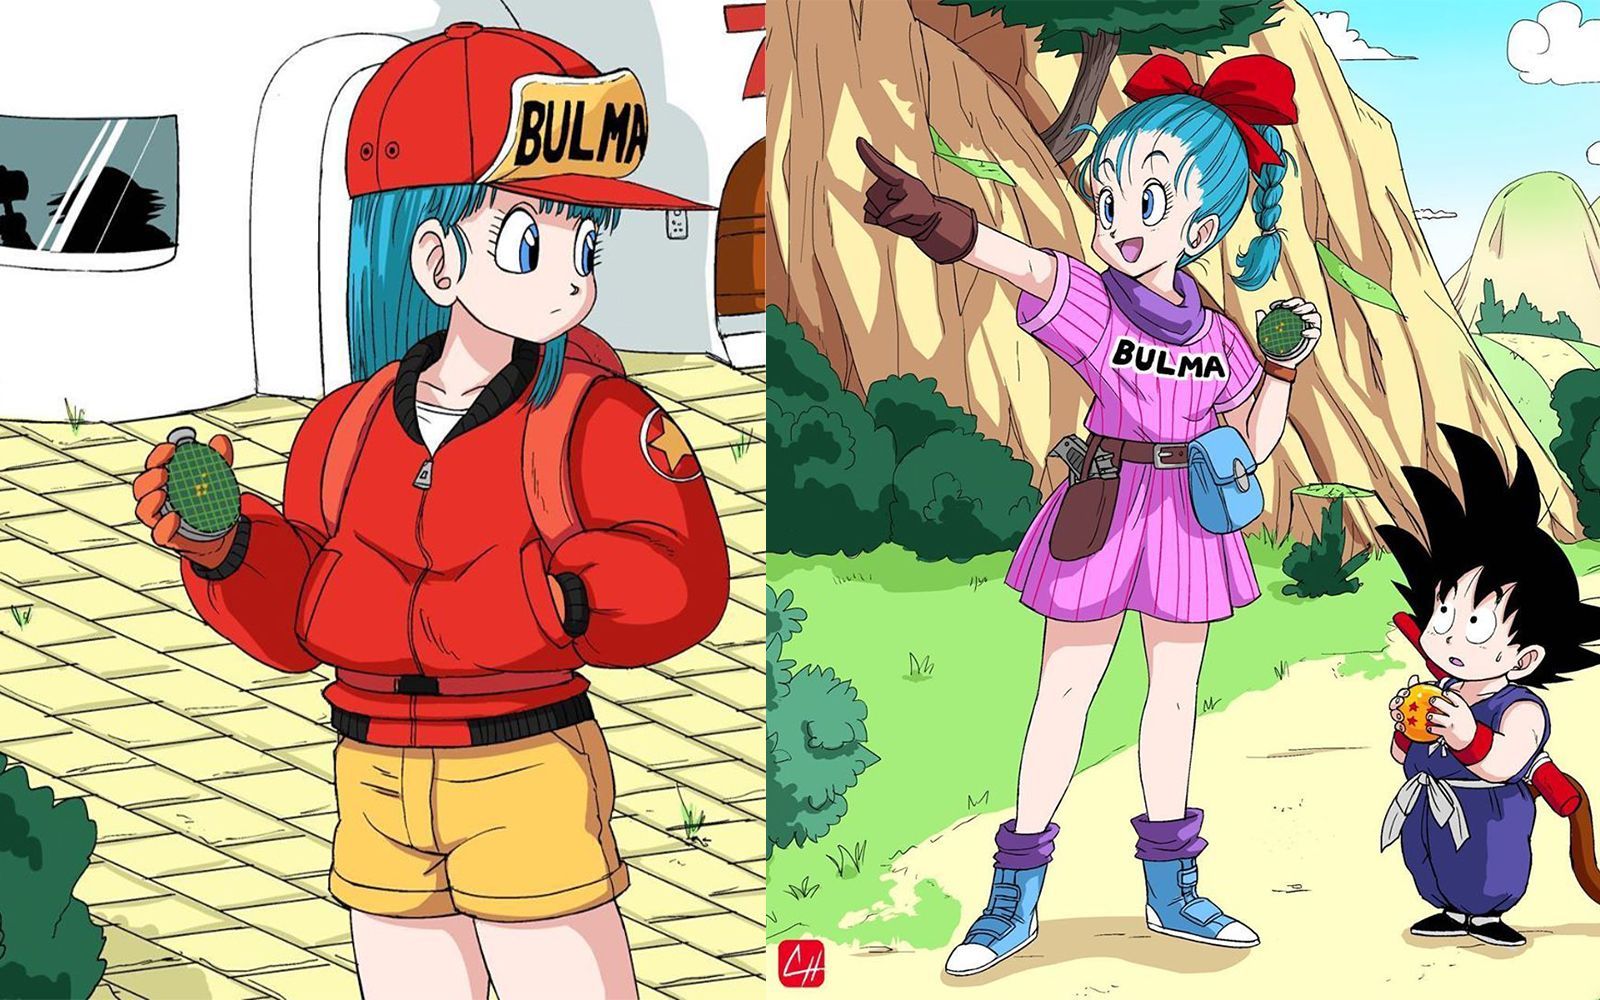 Bulma and the other heroines of Japanese cartoons